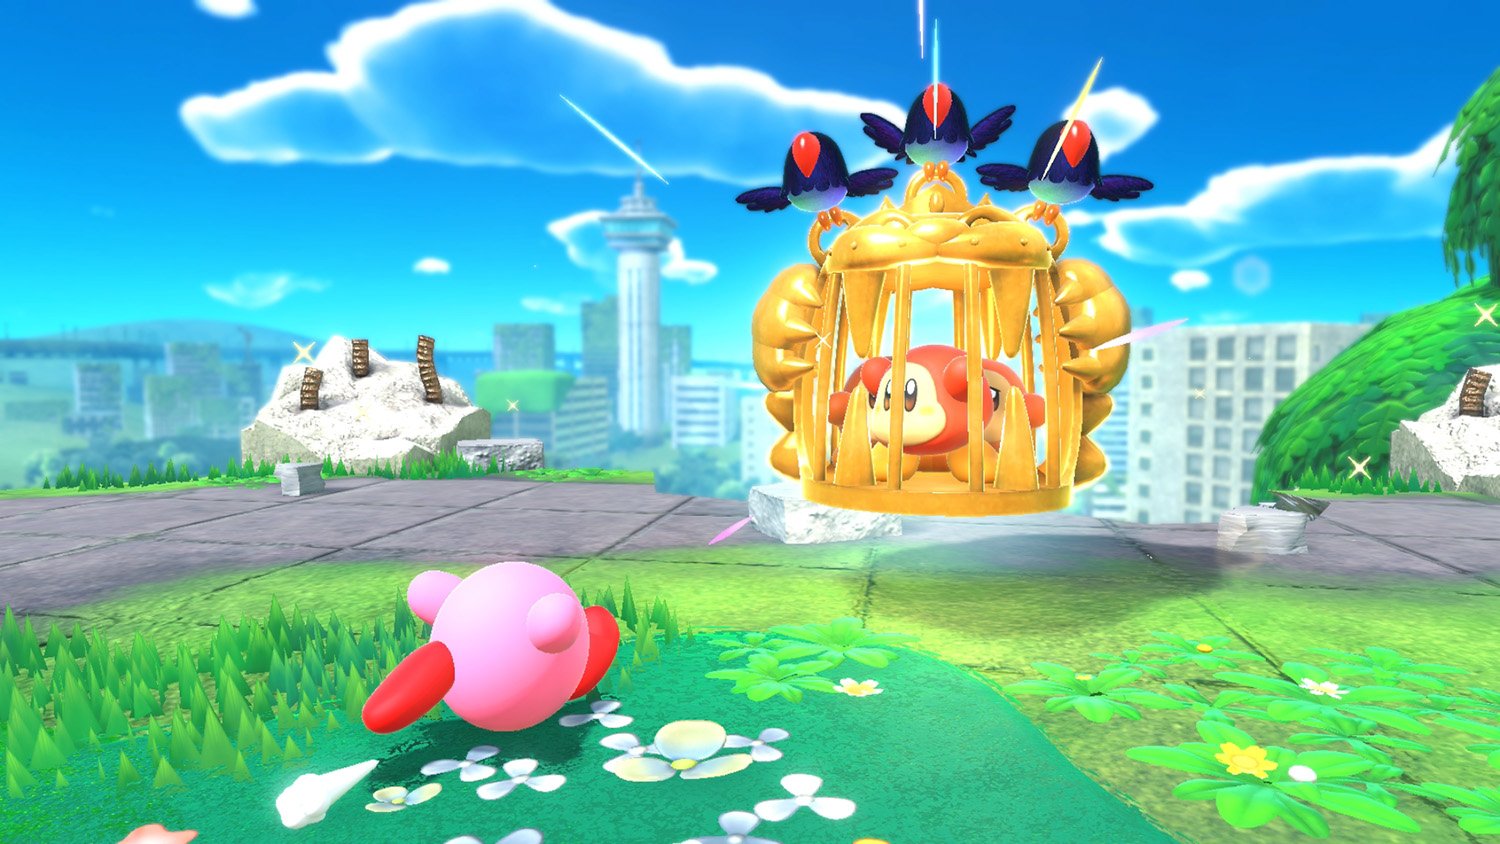 How Long Is Kirby and the Forgotten Land?